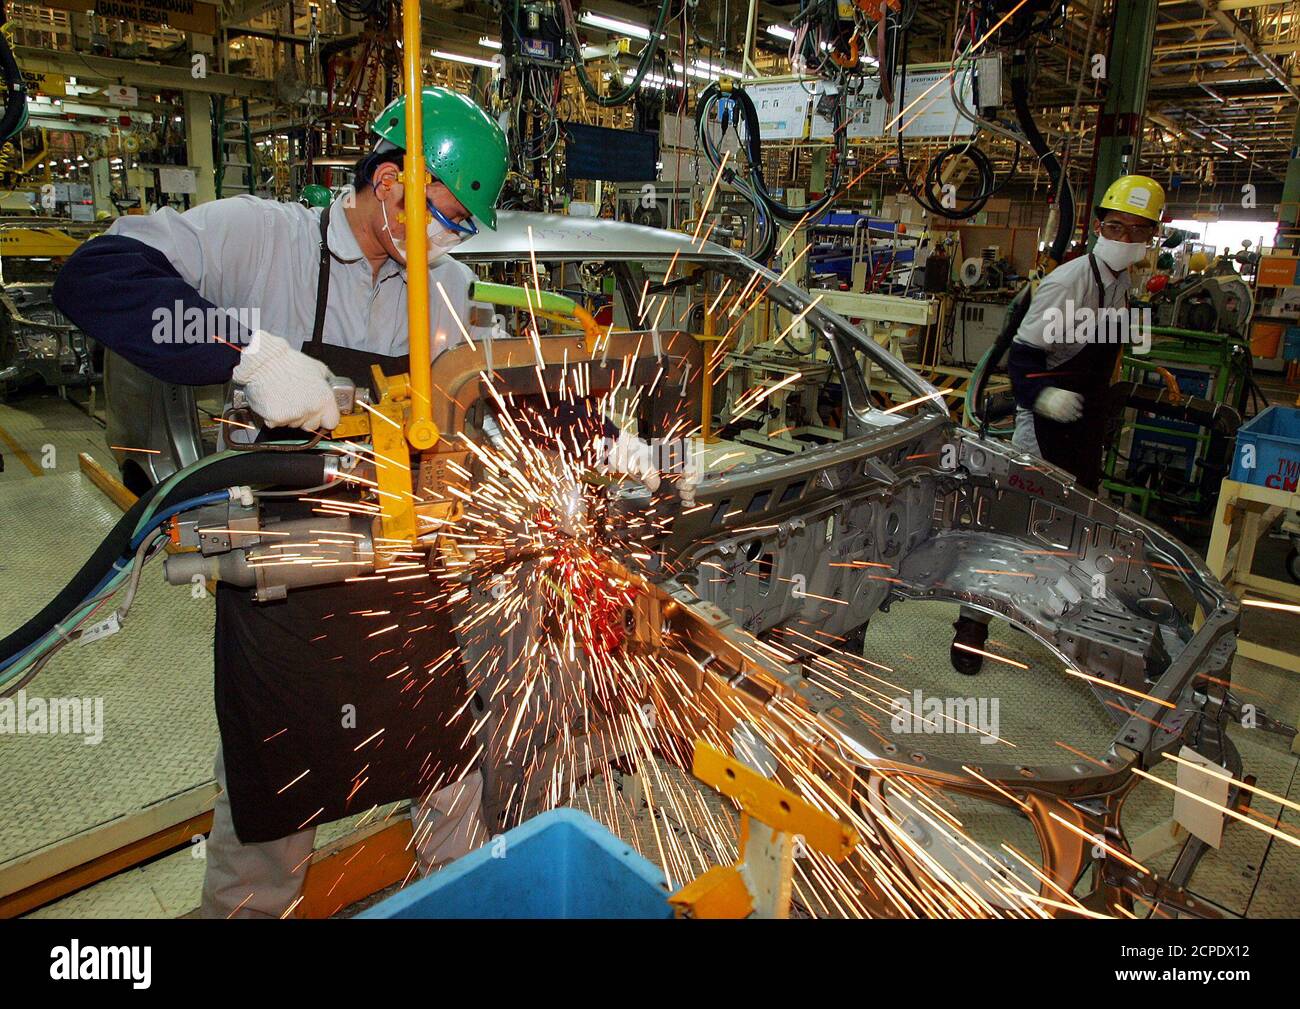 An Indonesian worker welds a part of a new multi-purpose vehicle called Kijang Innova at the Toyota plant in Karawang, West Java province on September 1, 2004. Indonesia's leading auto distributor, PT Astra International Tbk, launched a new generation of its best selling car on Wednesday. REUTERS/Beawiharta  BEA/TW Stock Photo